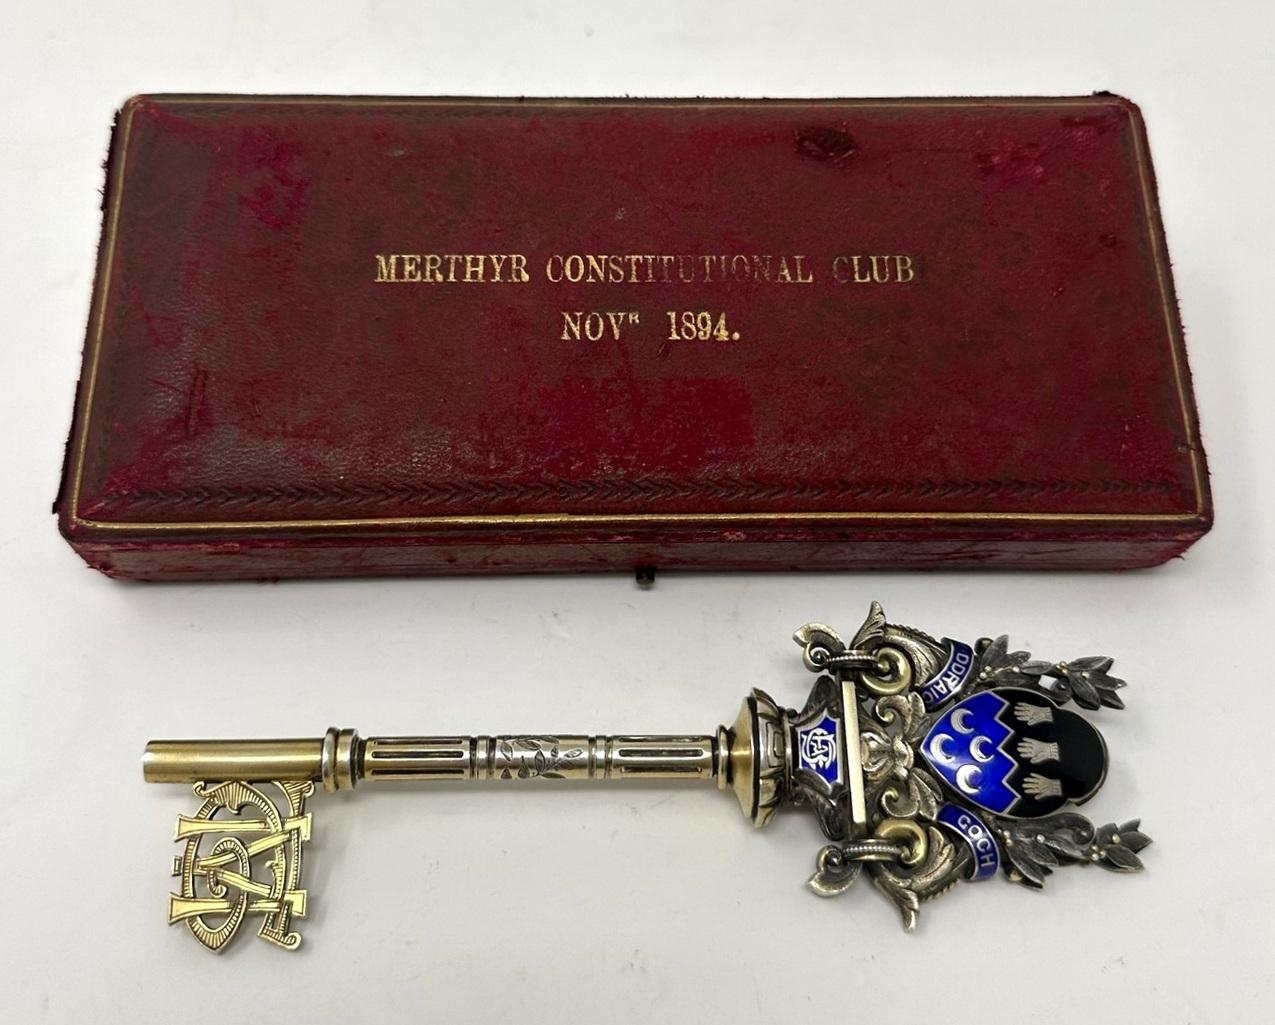 An extremely unusual Silver Gilt Presentation Door Key modelled for the Merthyr Constitutional Club in Wales, England in 1894, complete with its original silk lined box.  

The extremely ornate handle with blue and black enameling, the reverse reads